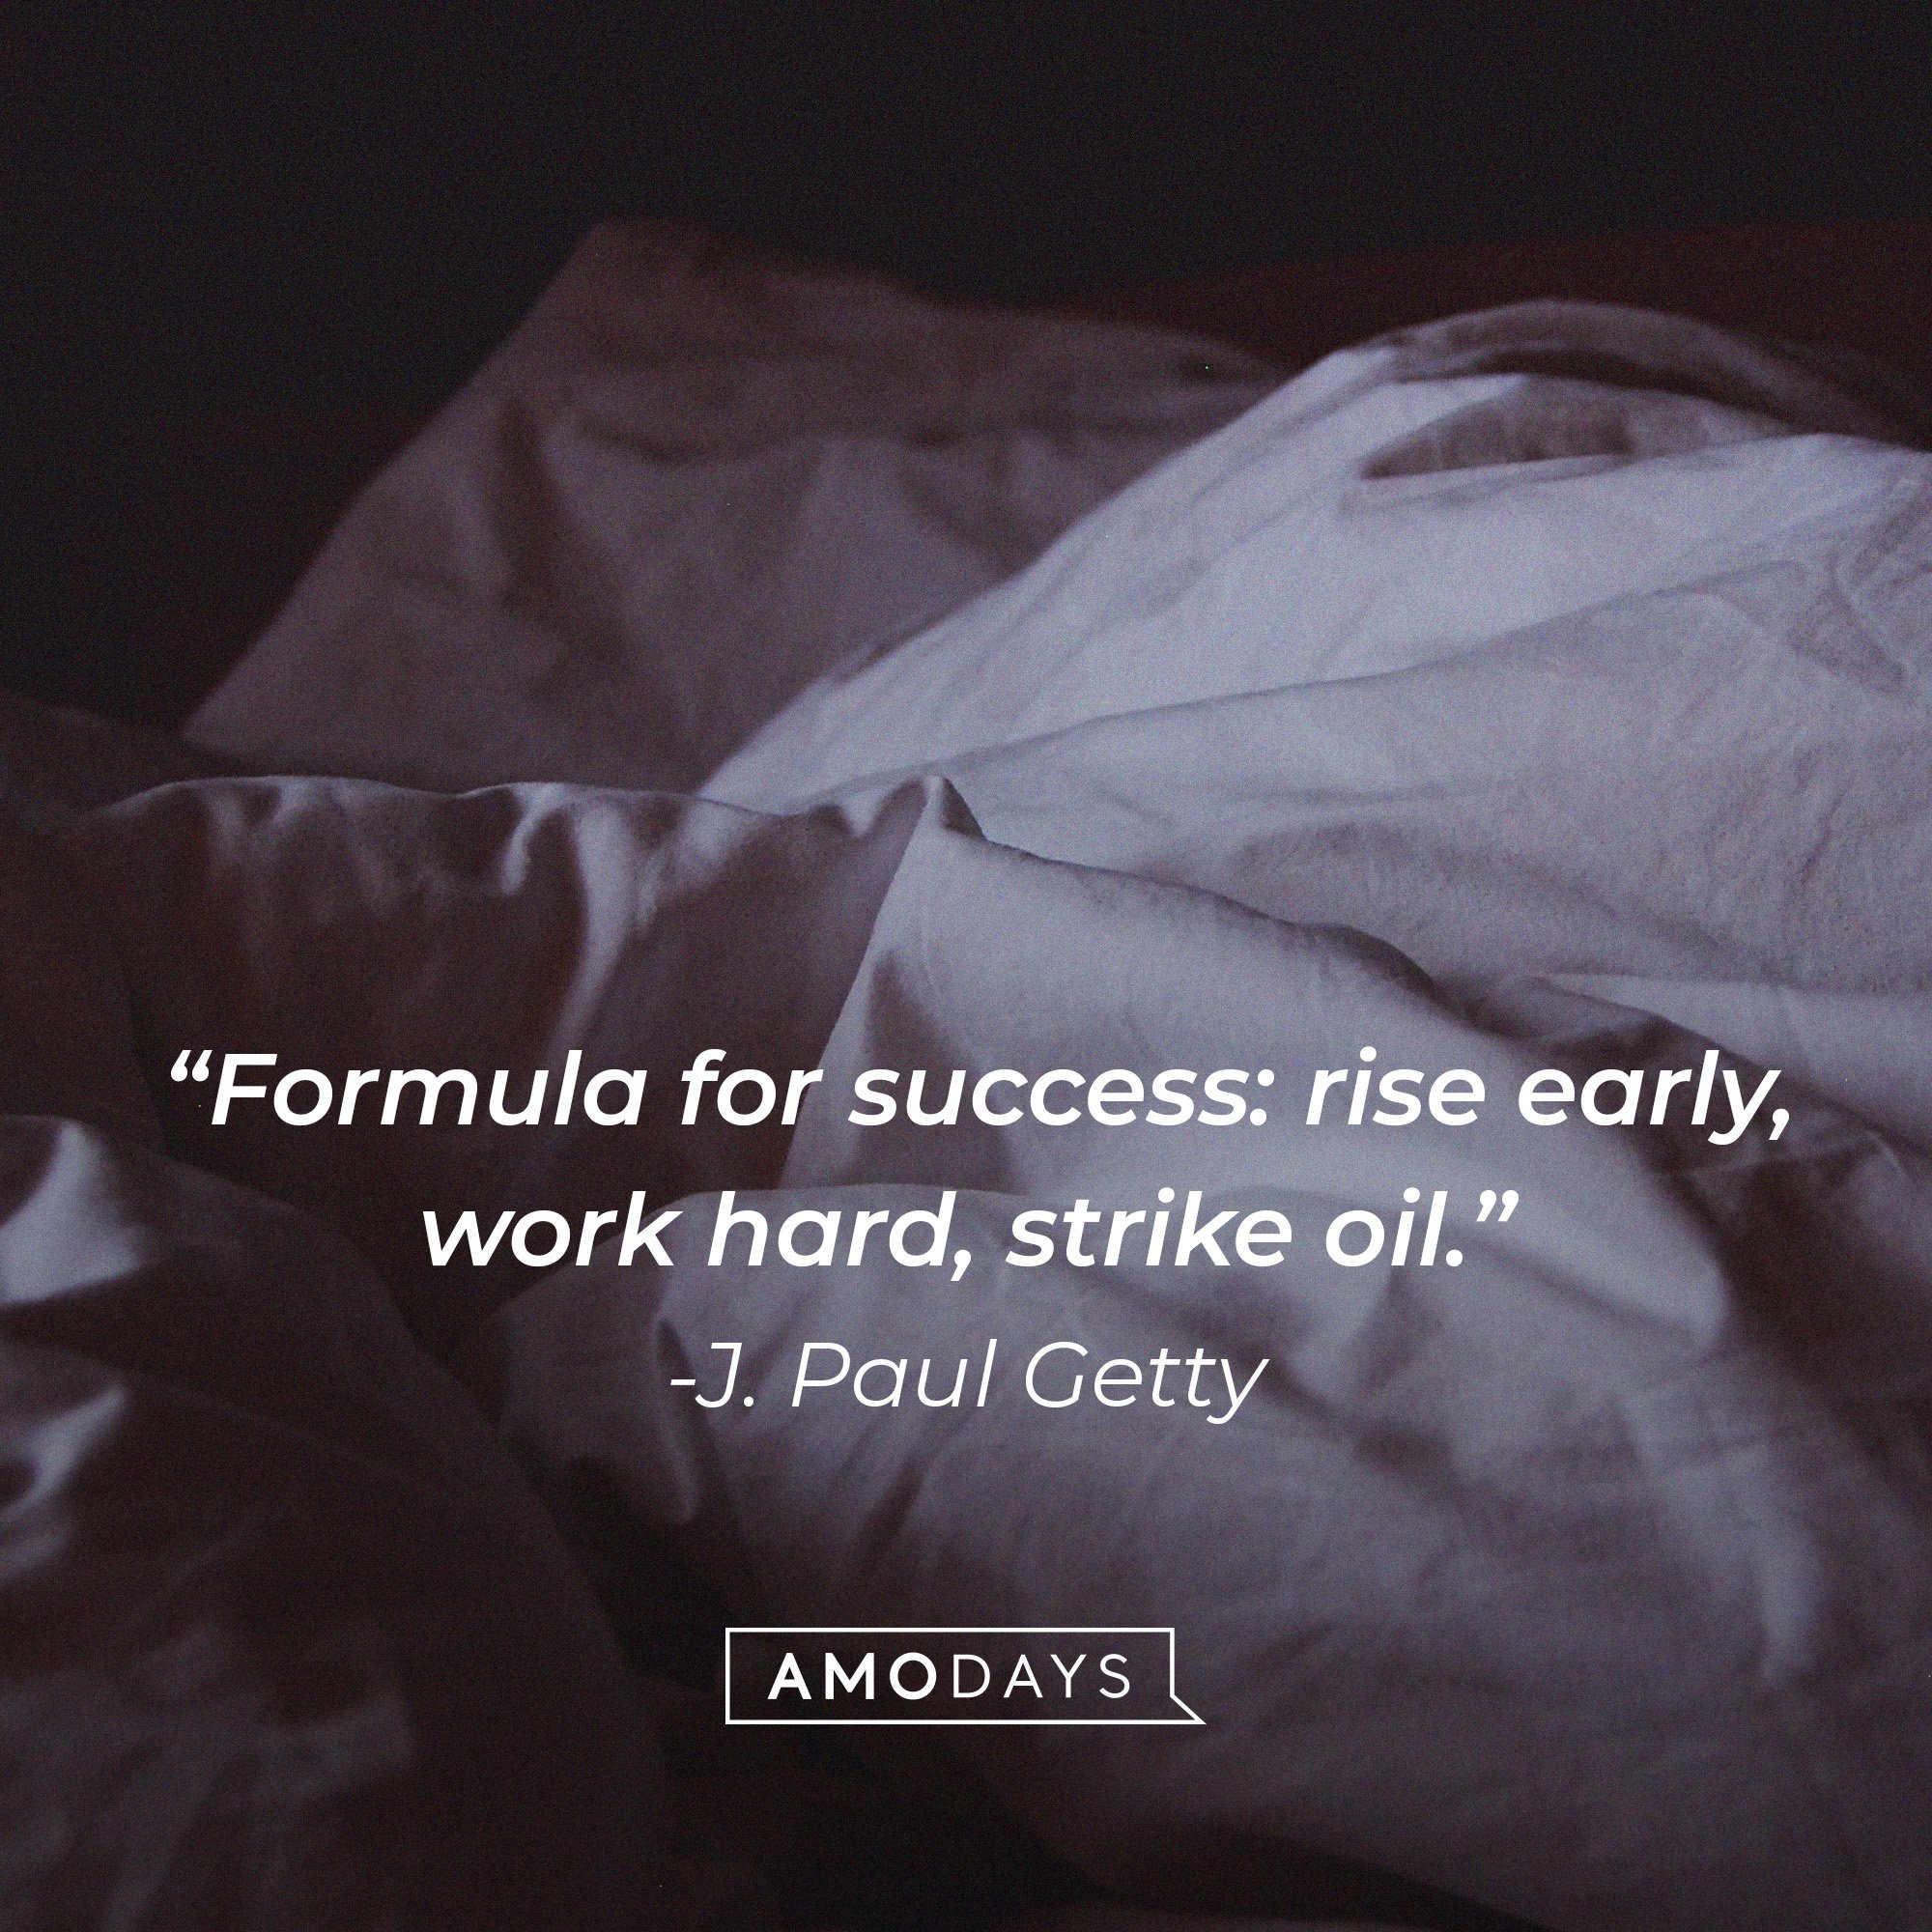 J. Paul Getty's quote: “Formula for success: rise early, work hard, strike oil.” | Image: AmoDays 